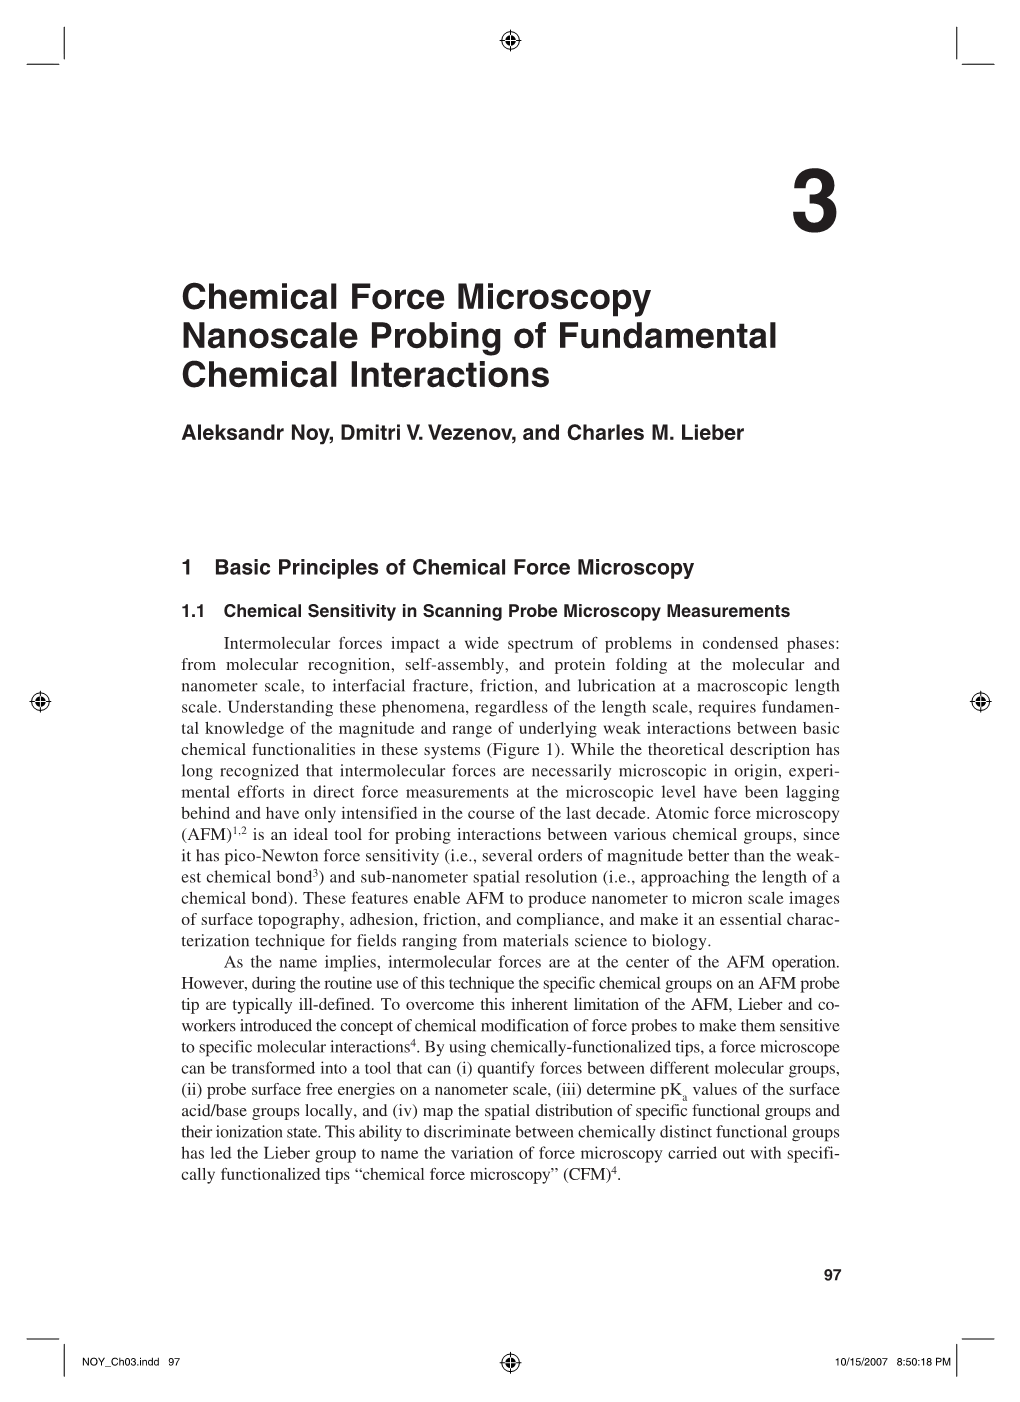 Chemical Force Microscopy Nanoscale Probing of Fundamental Chemical Interactions